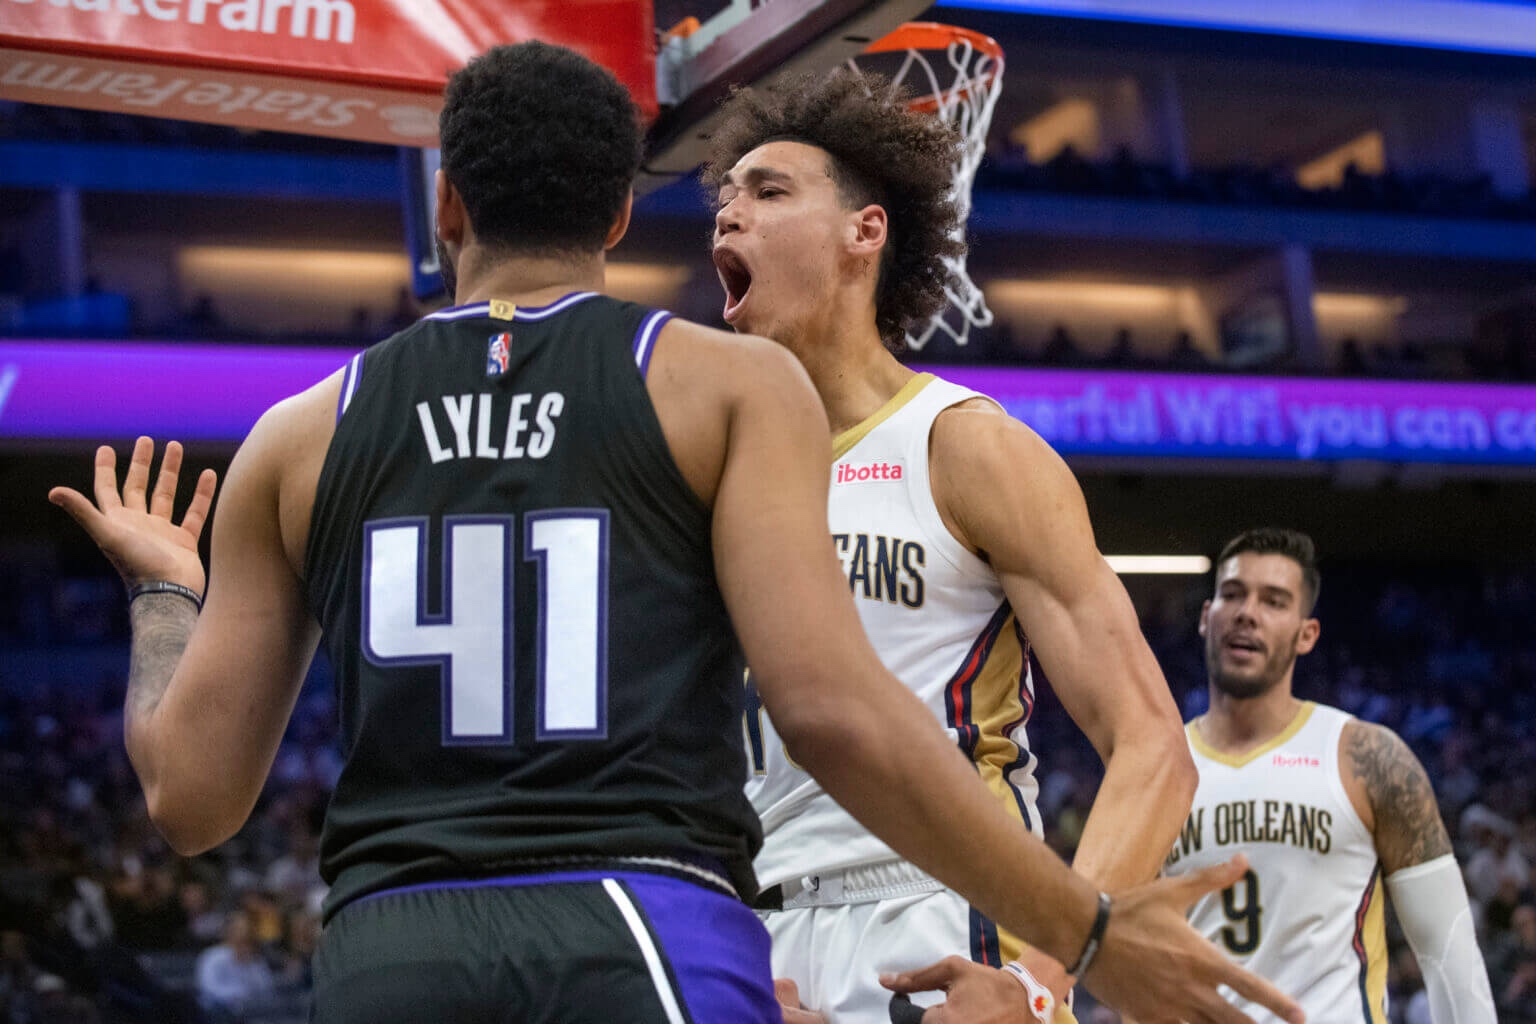 Trey Lyles was unable to get the ref’s attention after Jaxson Hayes threatened to pee on his forehead